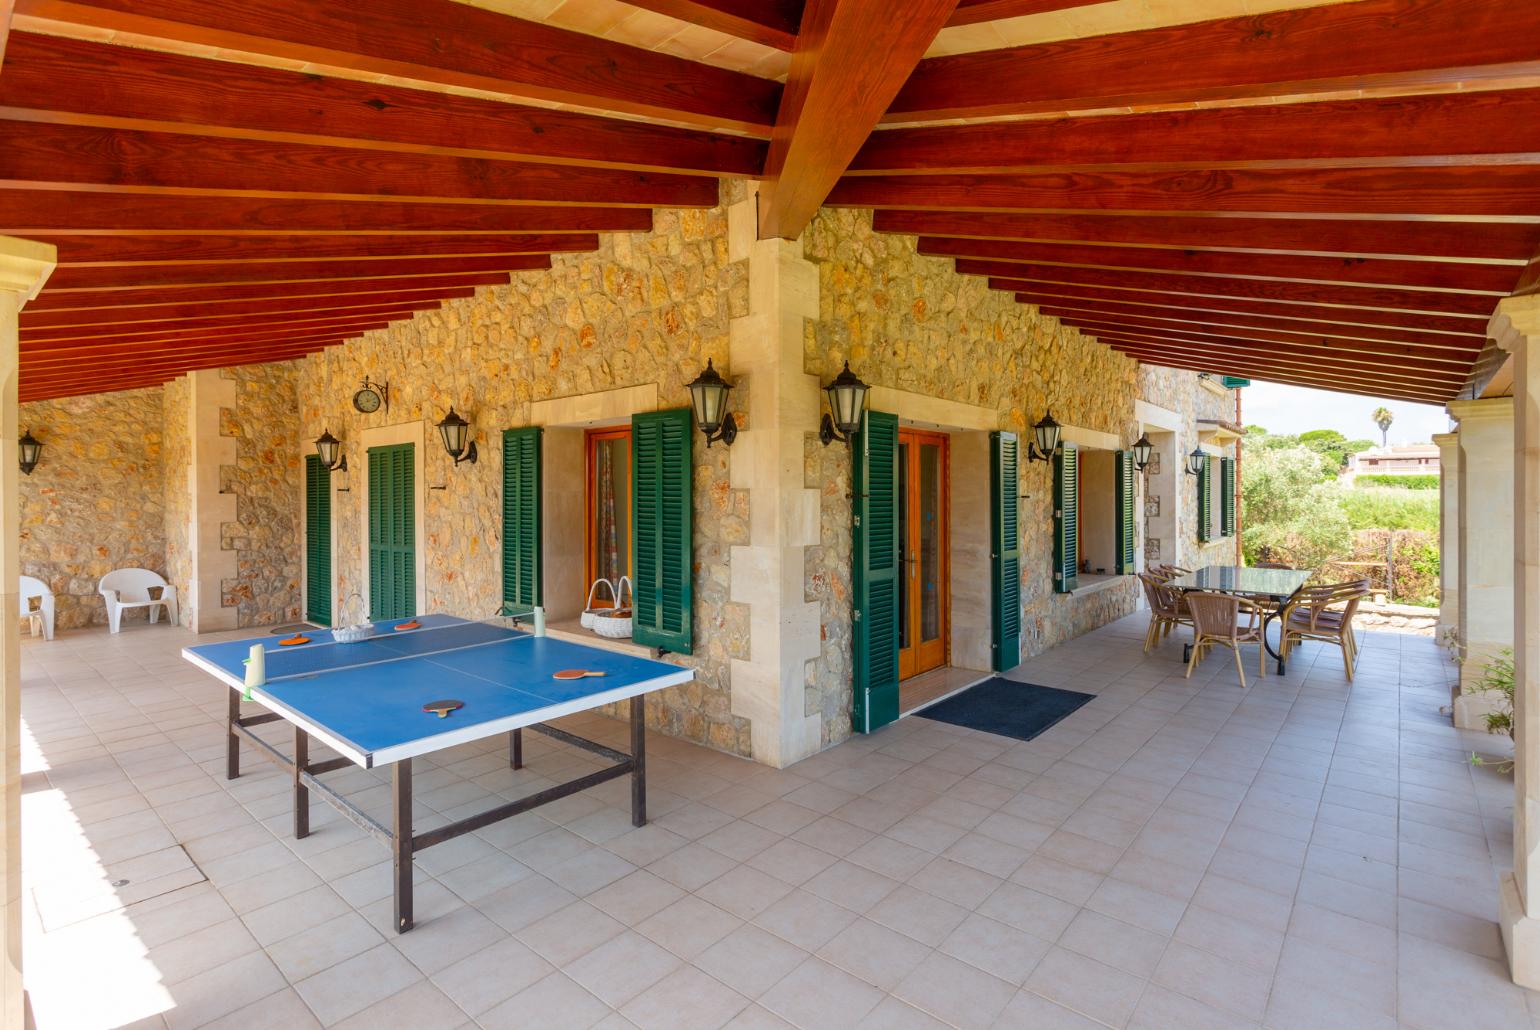 Sheltered terrace area with table tennis